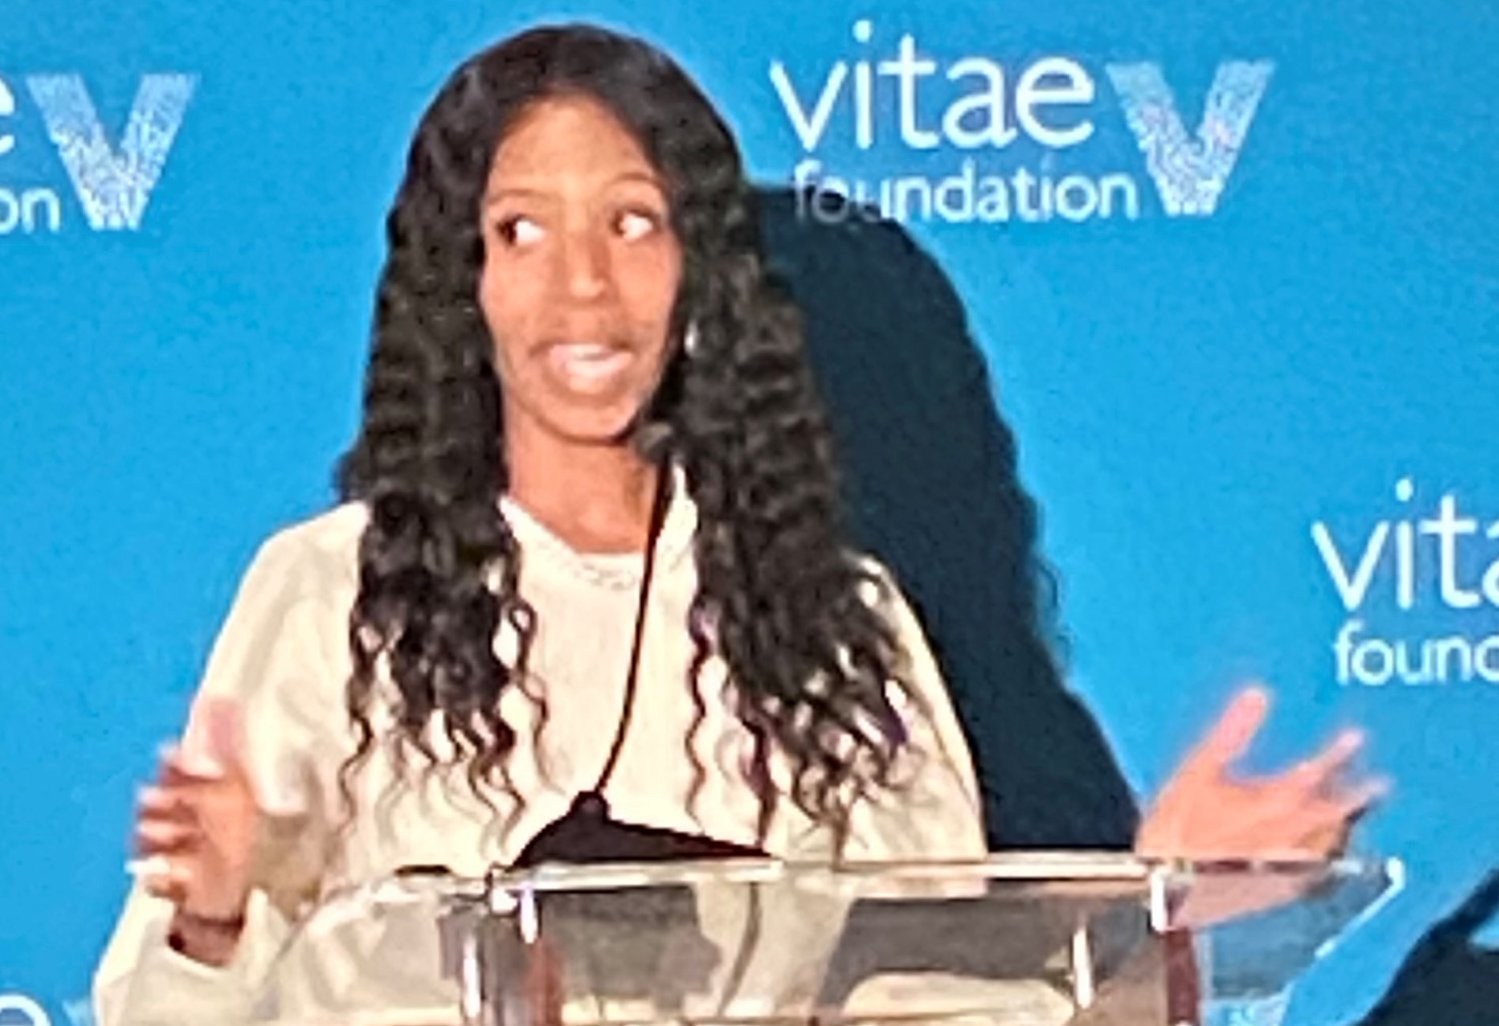 Former U.S. Rep. Mia Love of Utah gives the keynote address at the Vitae Foundation’s June 29 pro-life event in Columbia.